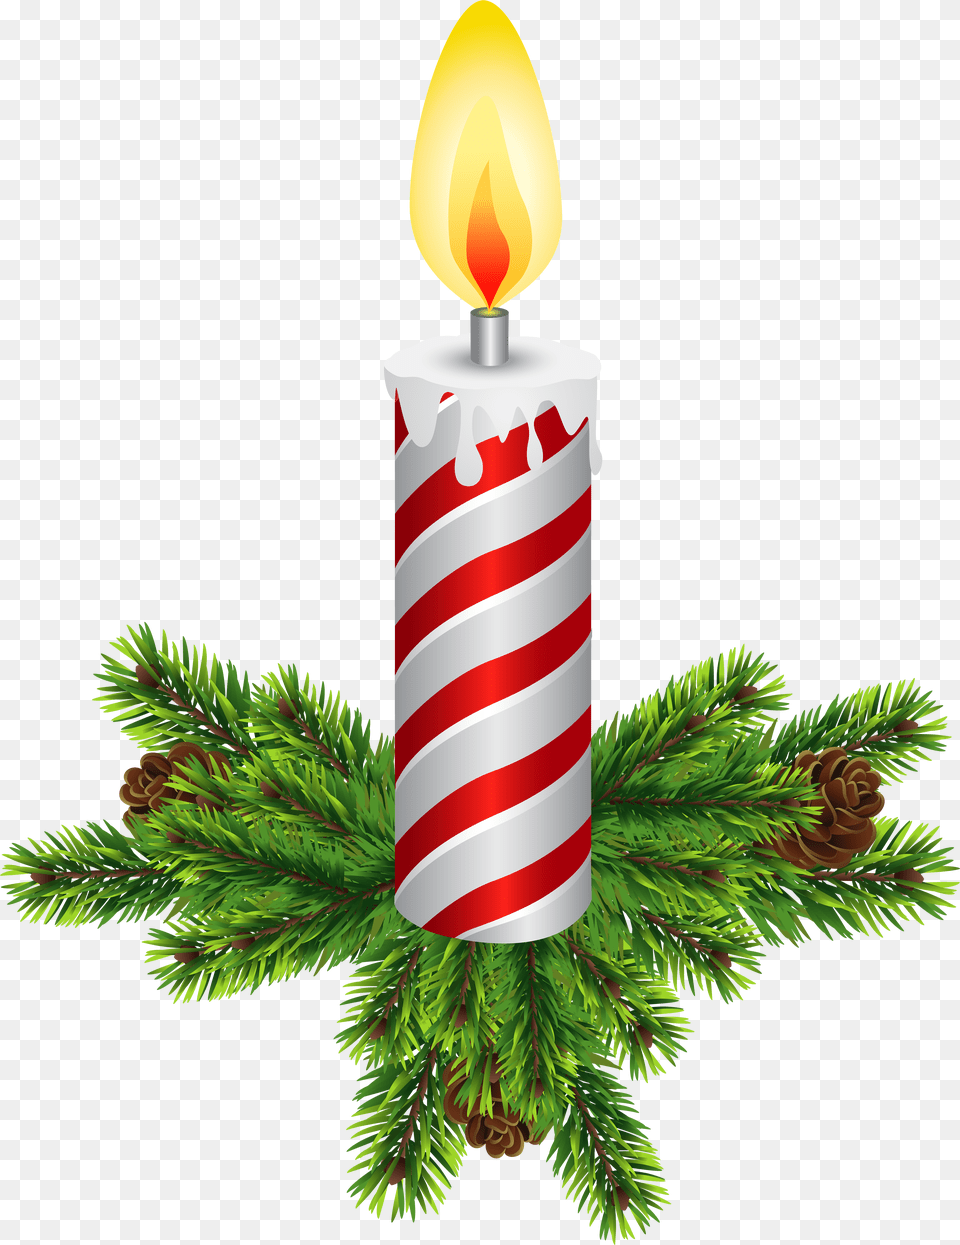 Christmas Candles Clip Artu200b Gallery Png Image